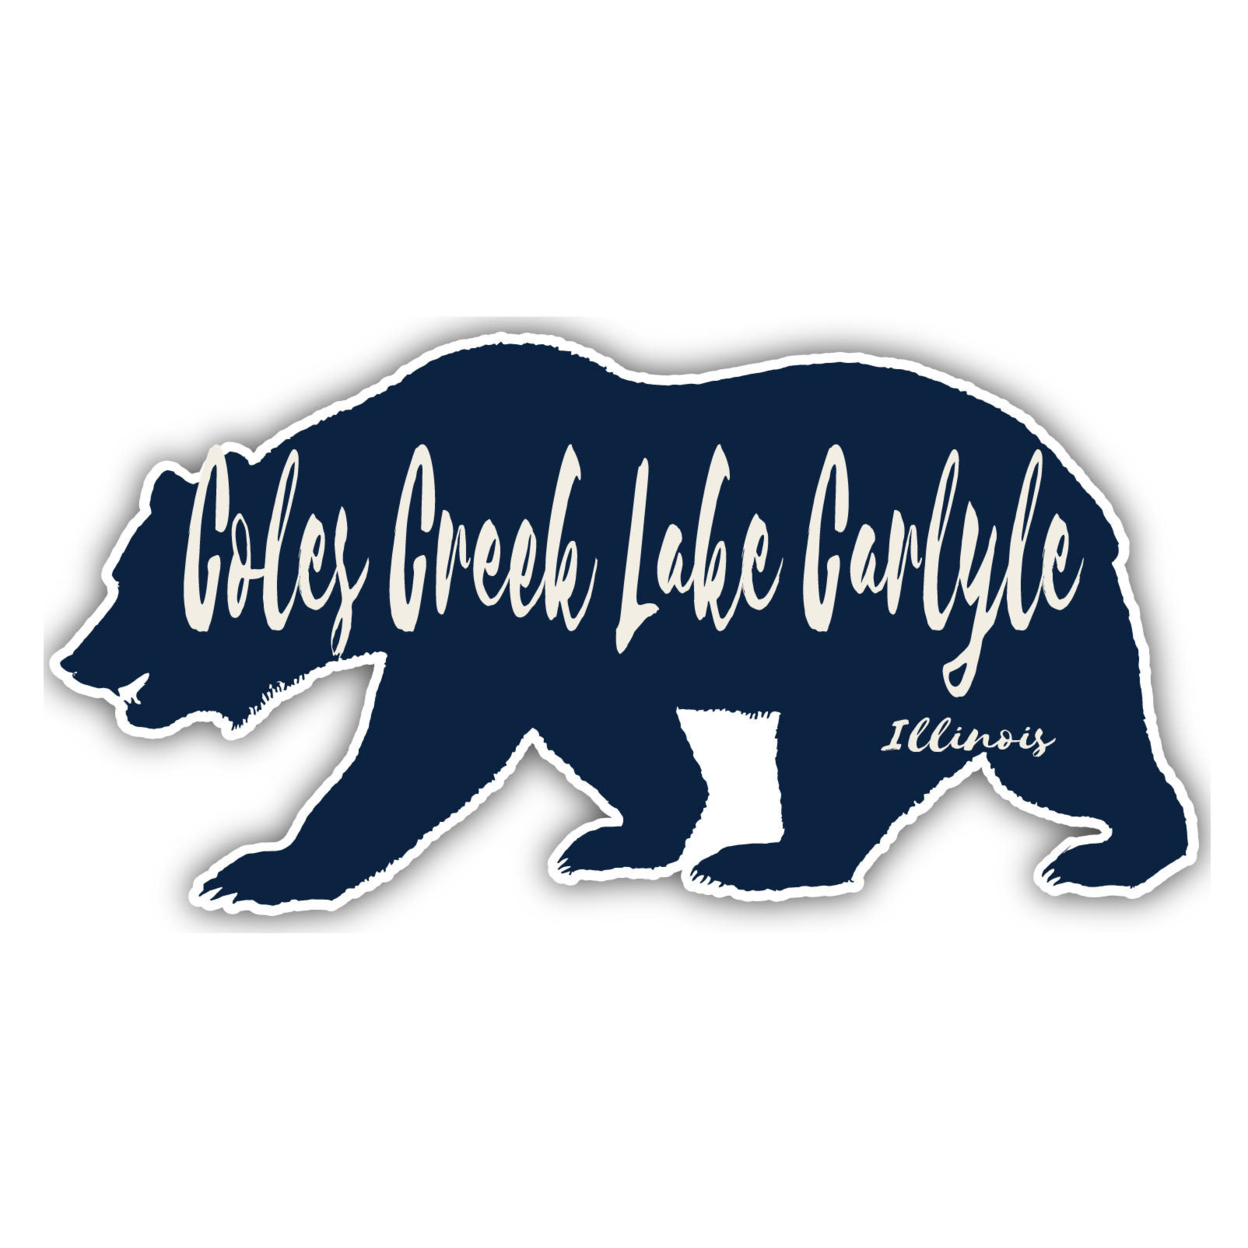 Coles Creek Lake Carlyle Illinois Souvenir Decorative Stickers (Choose Theme And Size) - 4-Pack, 2-Inch, Bear